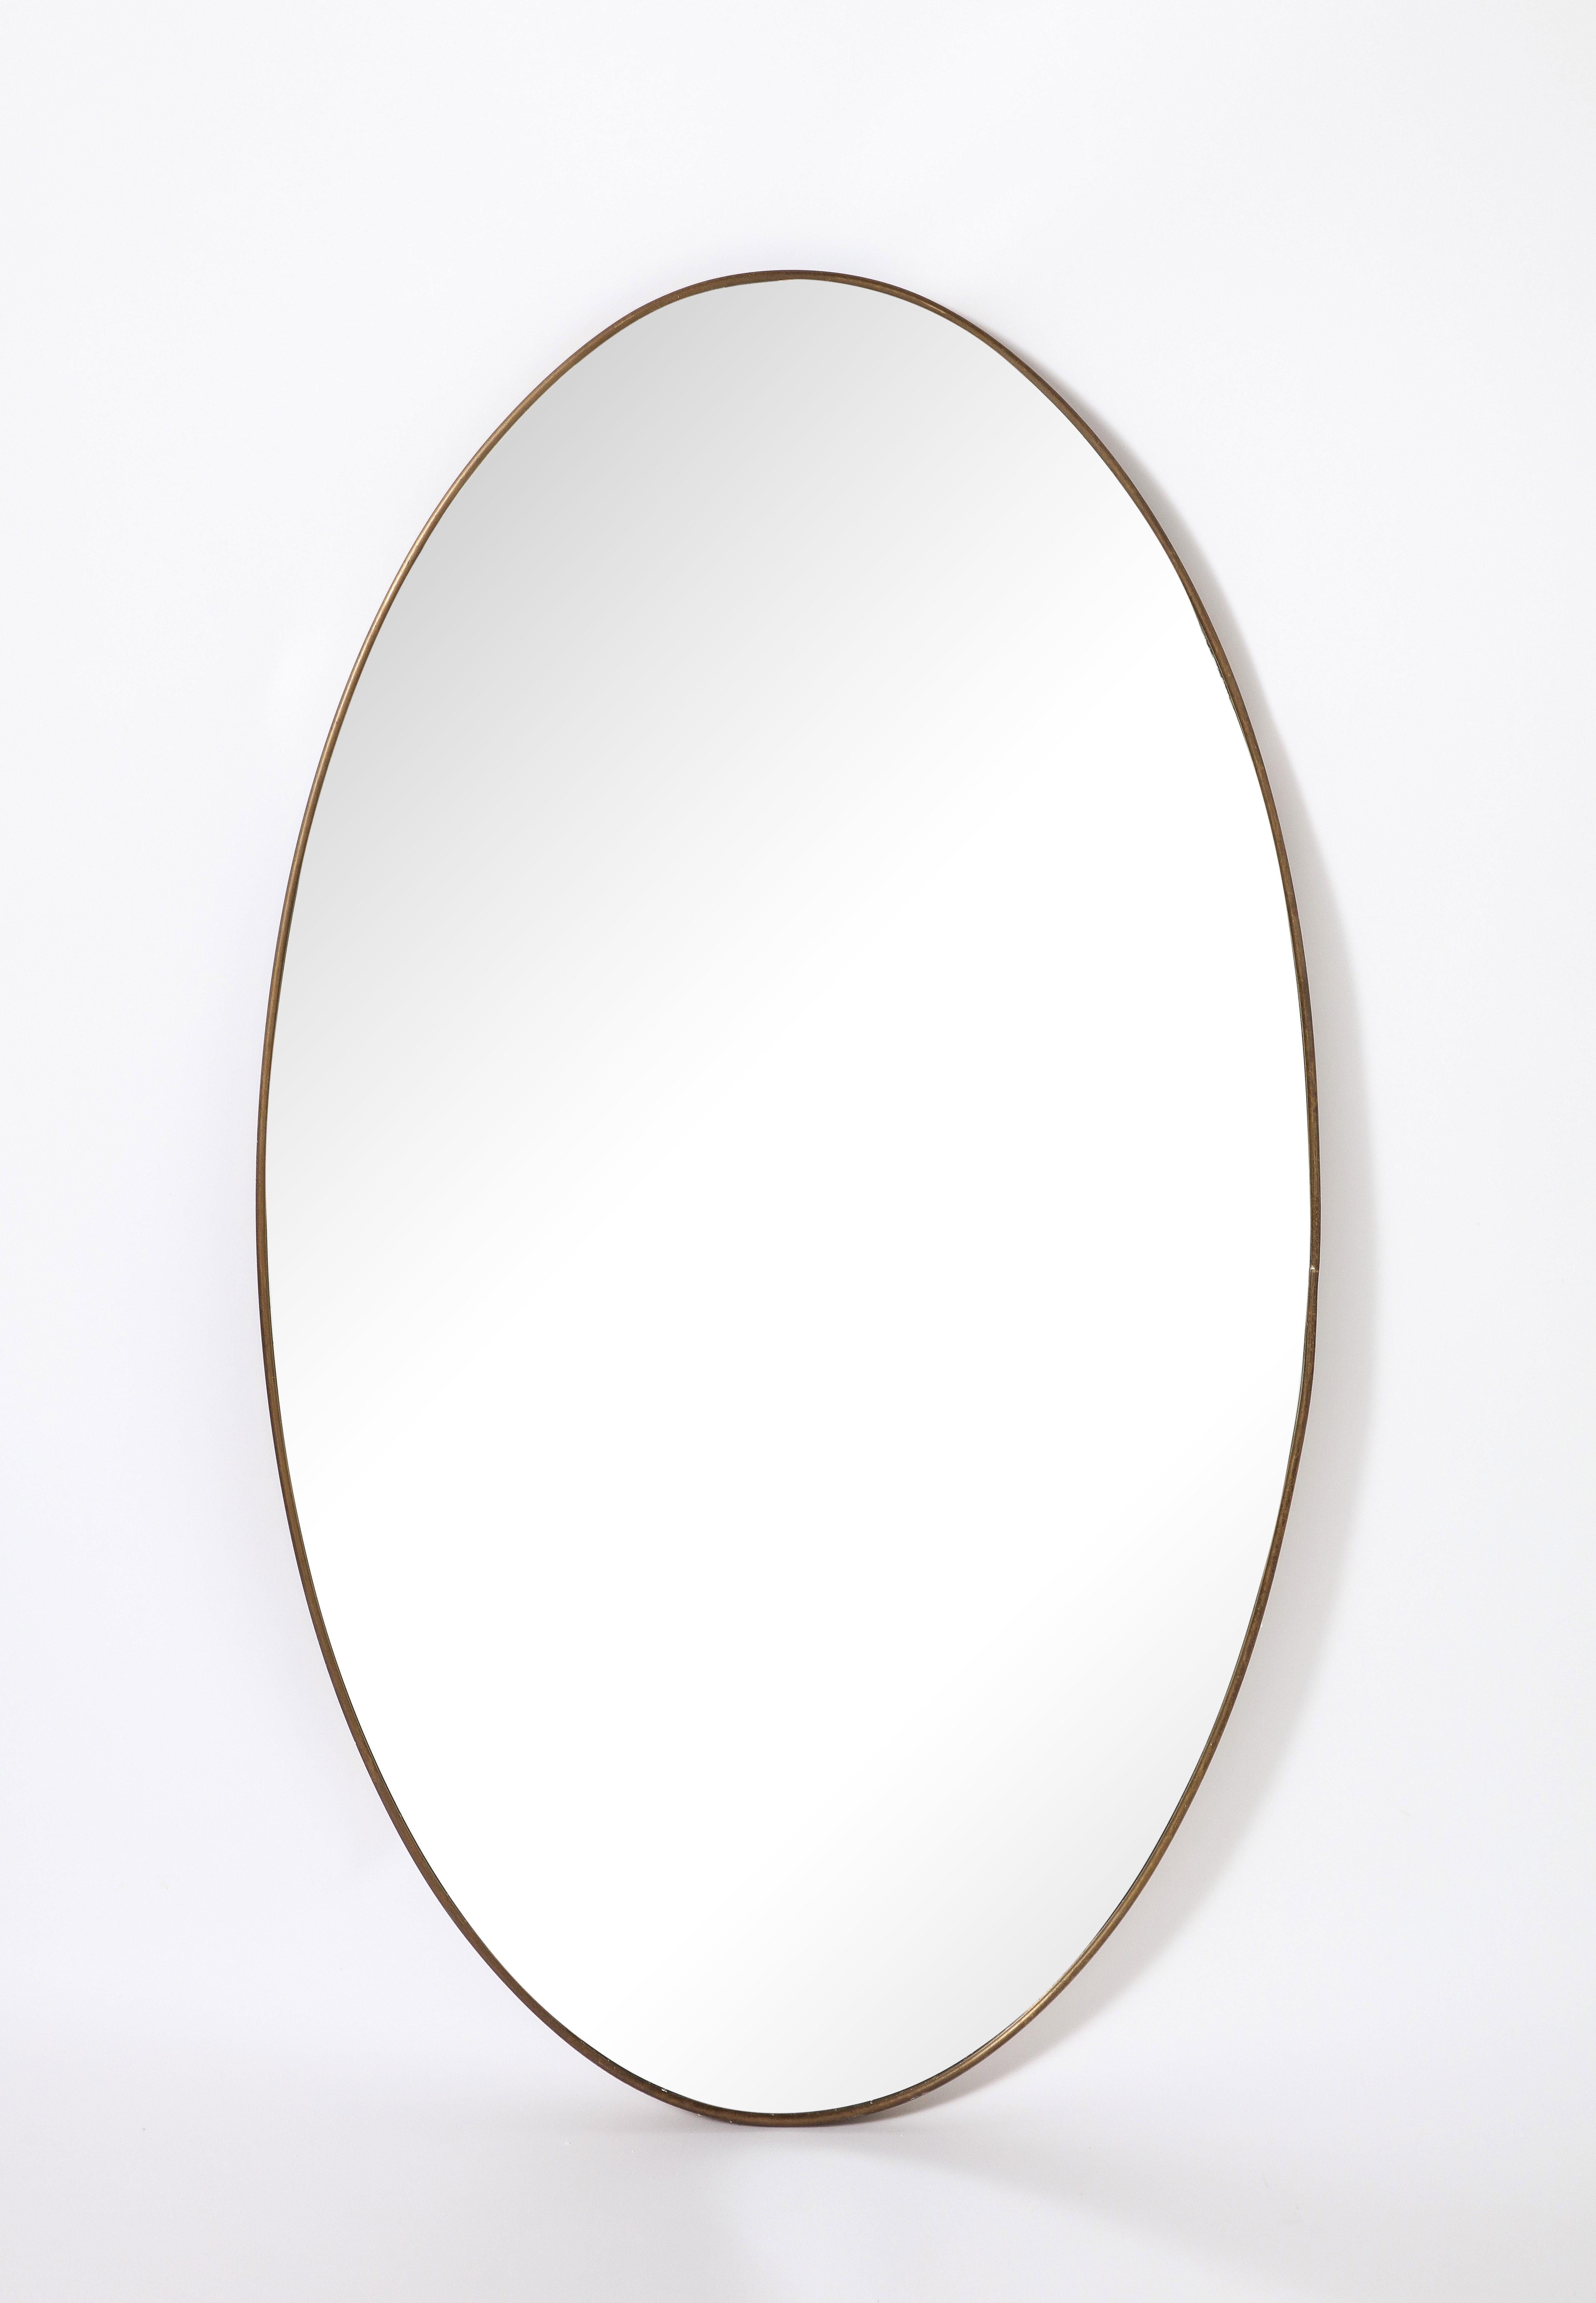 Italian Modernist oval brass grand scale mirrors; a wonderful shape, the brass with original warm and rich patina. Original mirror glass plate. 
Italy, circa 1950 
Size: 49